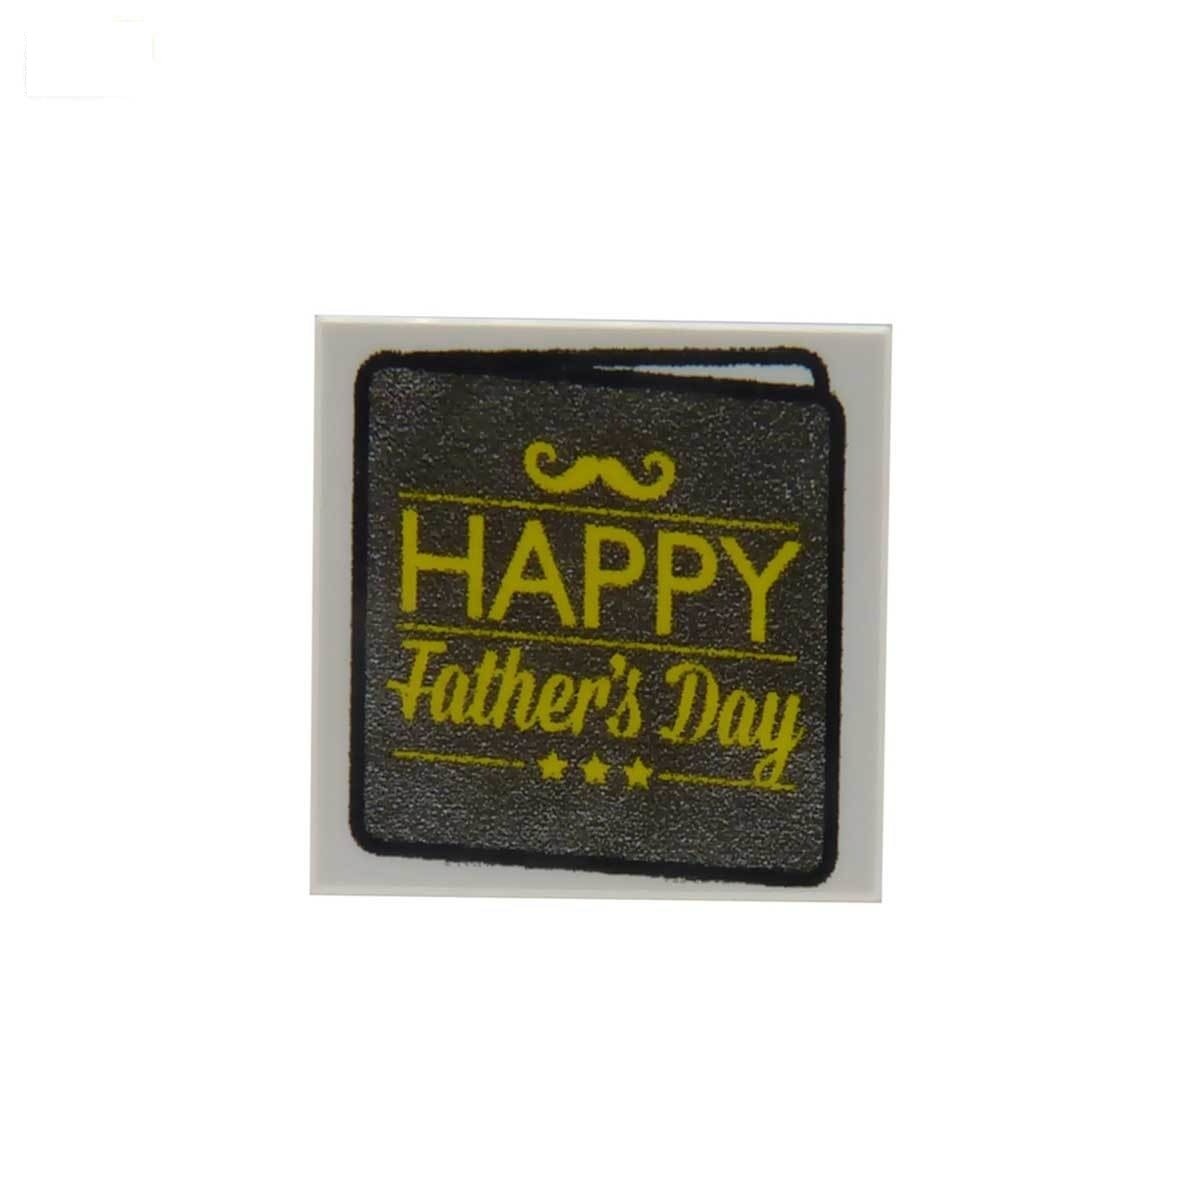 Happy Father's Day Card - Custom Printed LEGO Tile